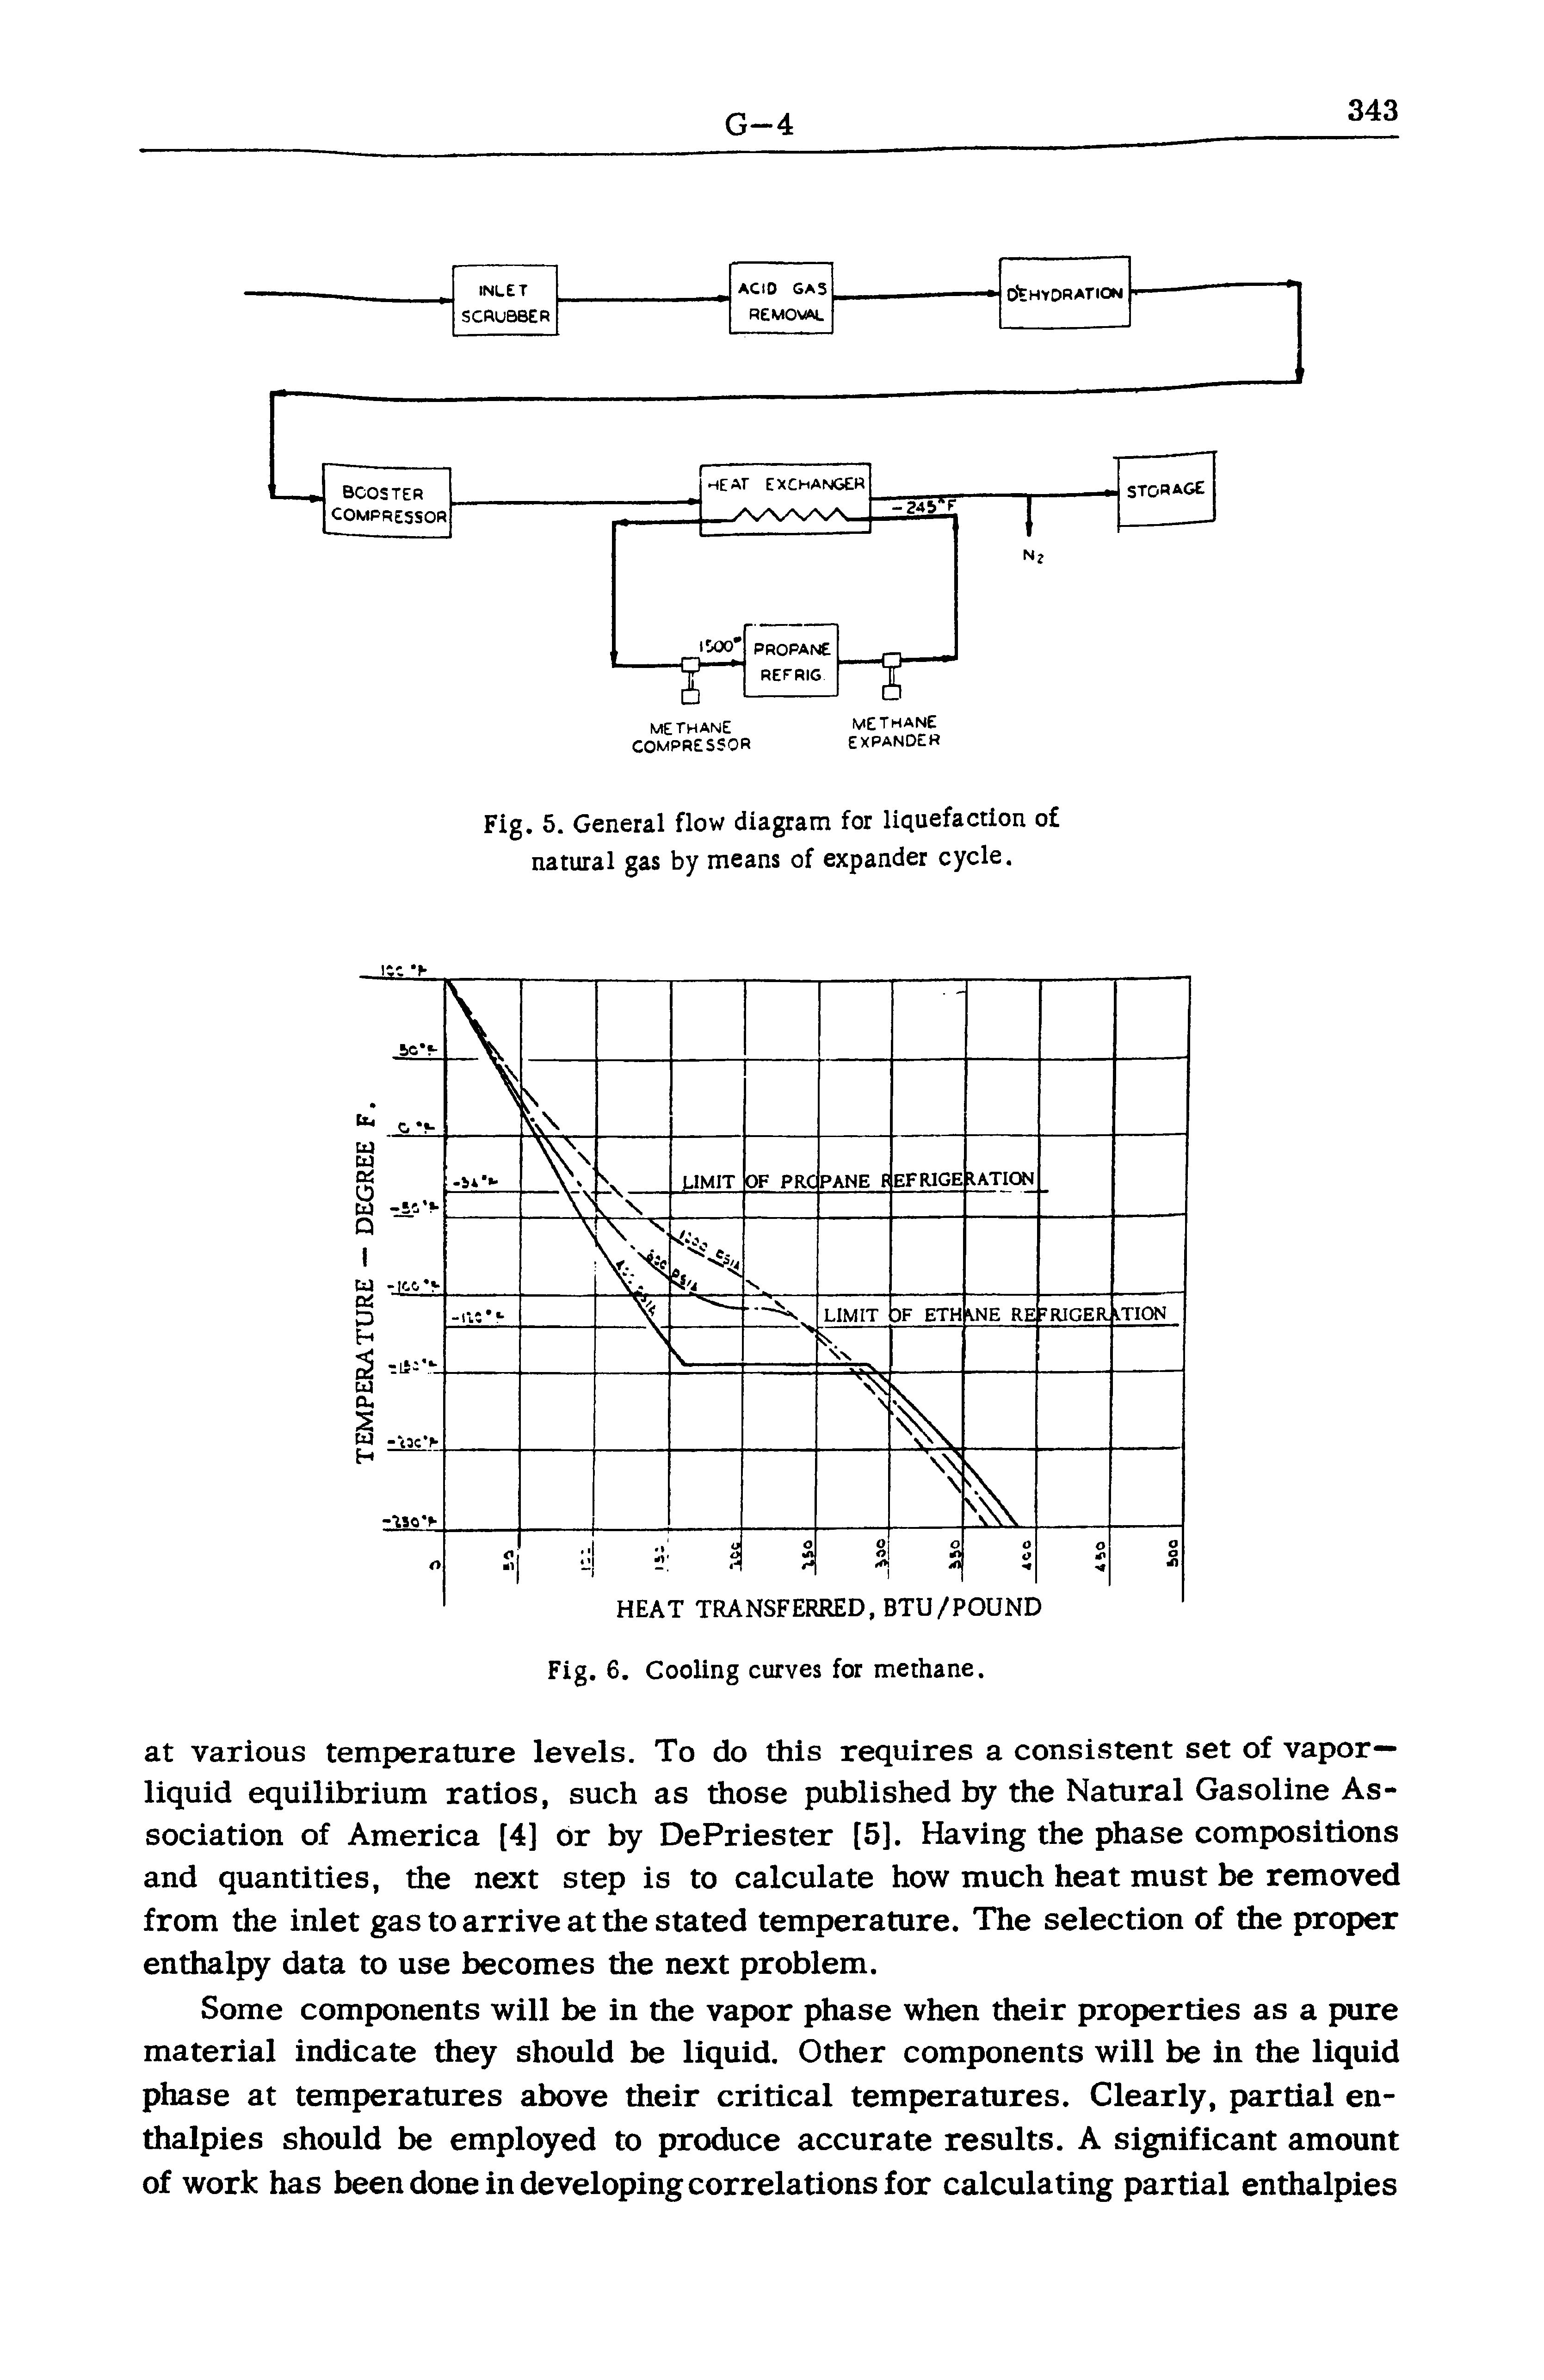 Fig. 5. General flow diagram for liquefaction of natural gas by means of expander cycle.